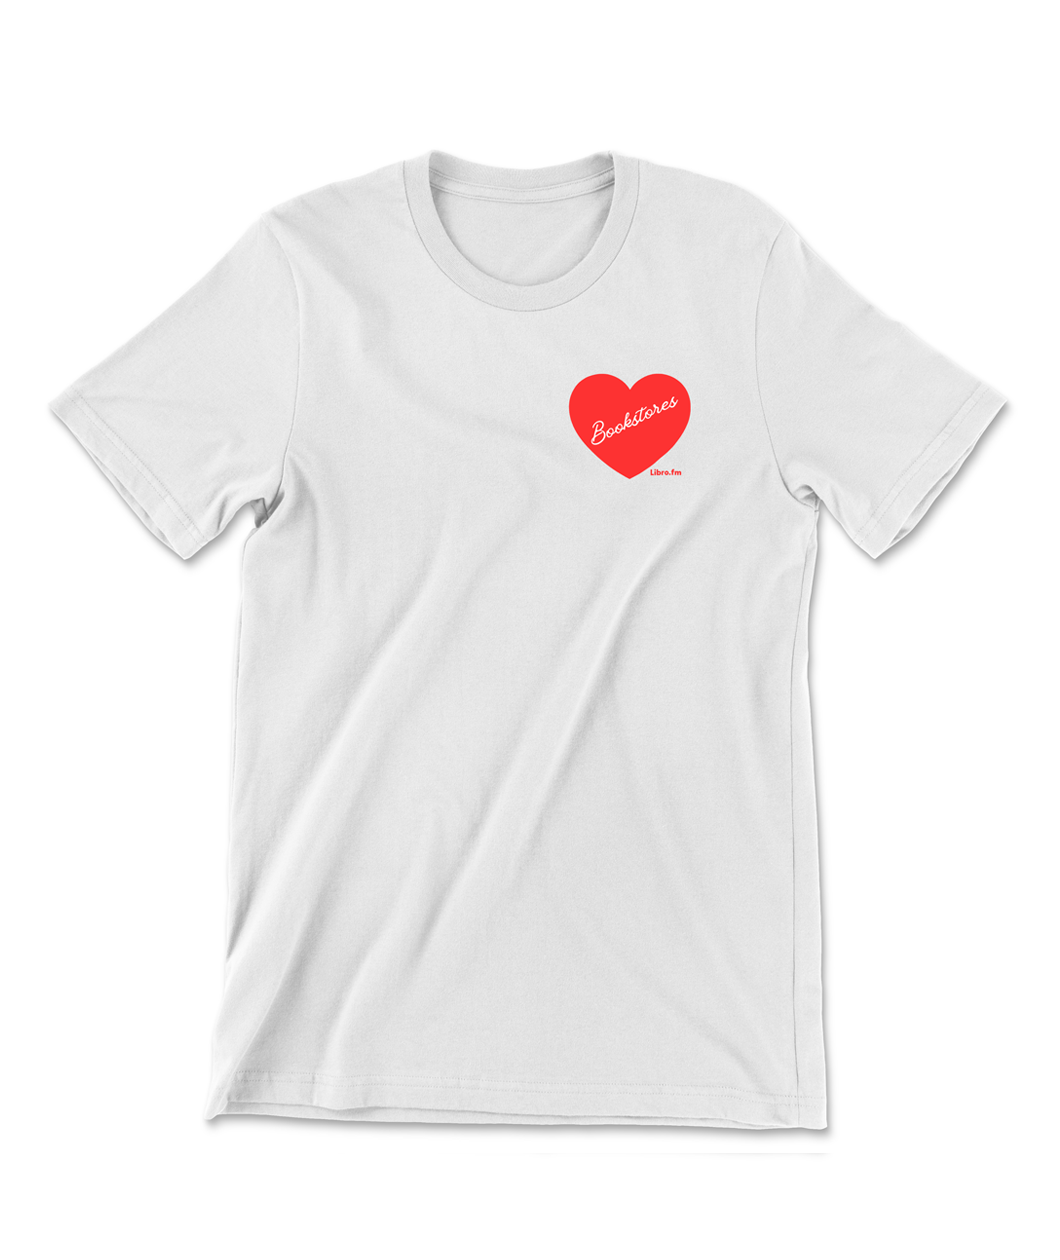 A white t-shirt with a small red heart in the upper left chest area with the word "Bookstores" written across the heart in white, small cursive lettering. There is a small Libro.fm logo in red below the heart.